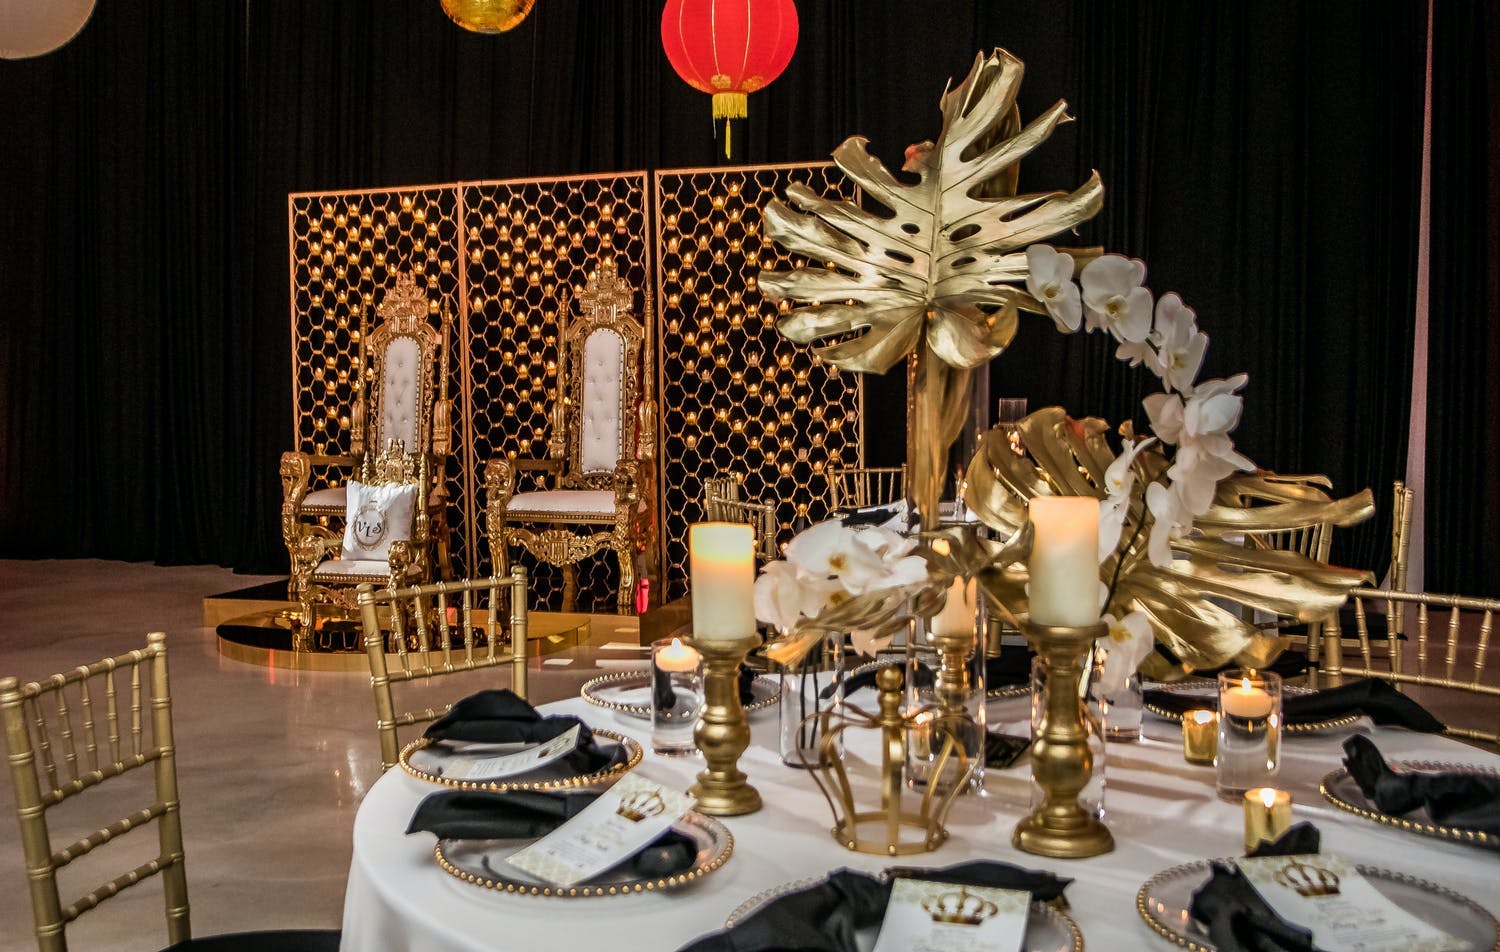 Royal-Themed Baby Shower With Gold Décor and Throne Seating | PartySlate